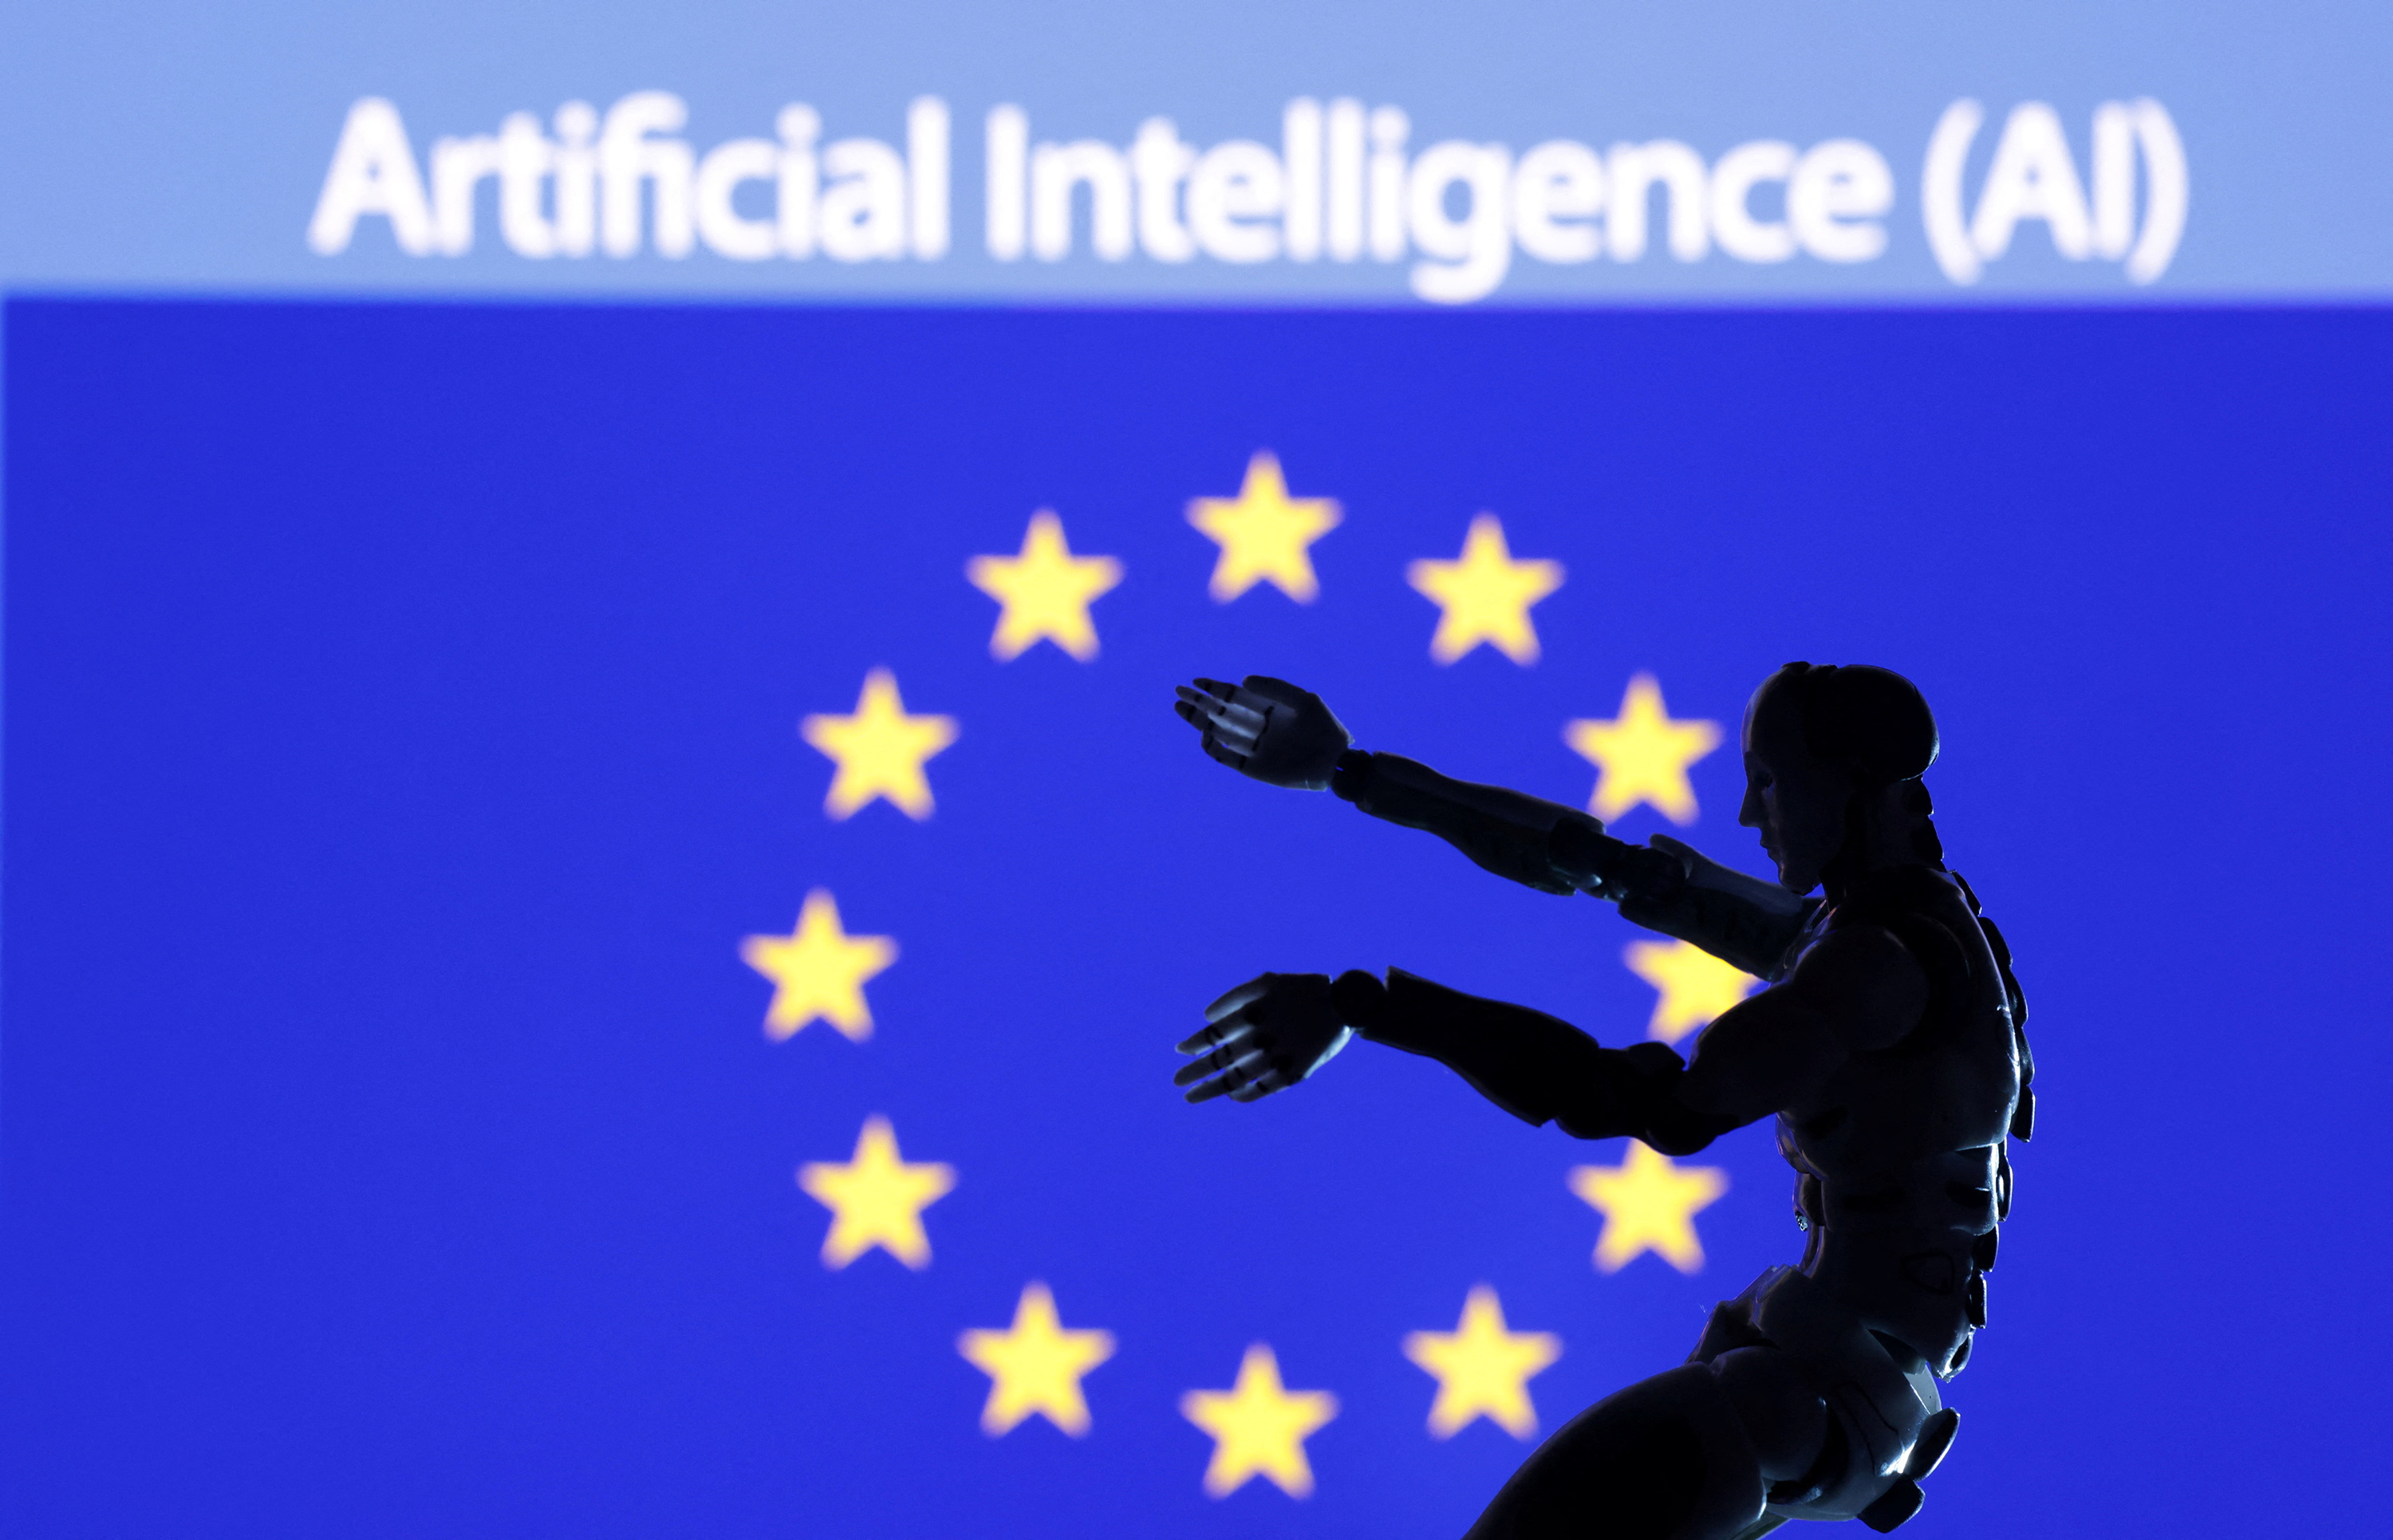 Illustration shows AI Artificial intelligence words, miniature of robot and EU flag